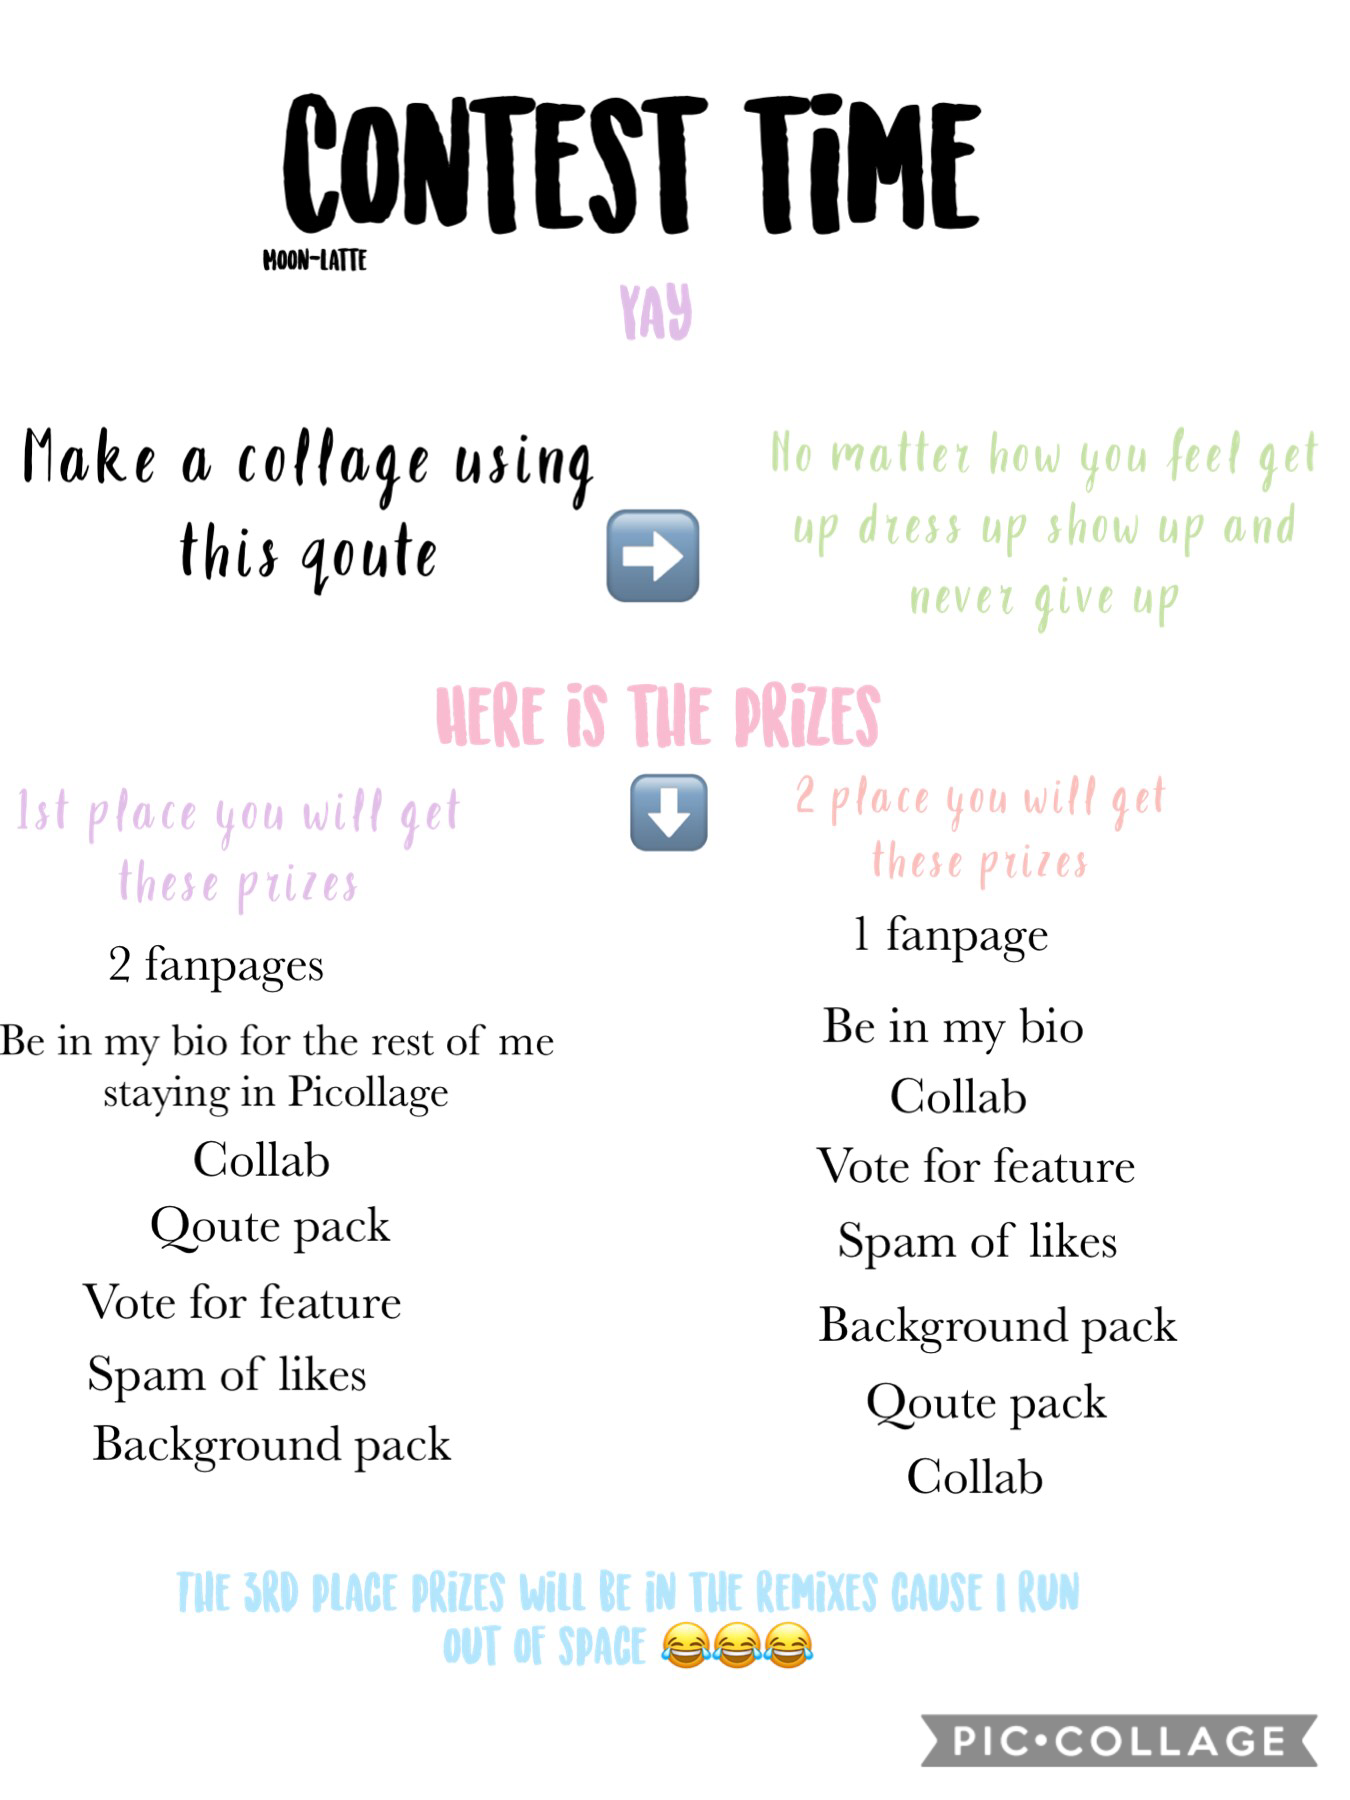 TAPPY 
ENTER MY CONTEST IF YOU ENTER U WILL STILL GET A PRIZE